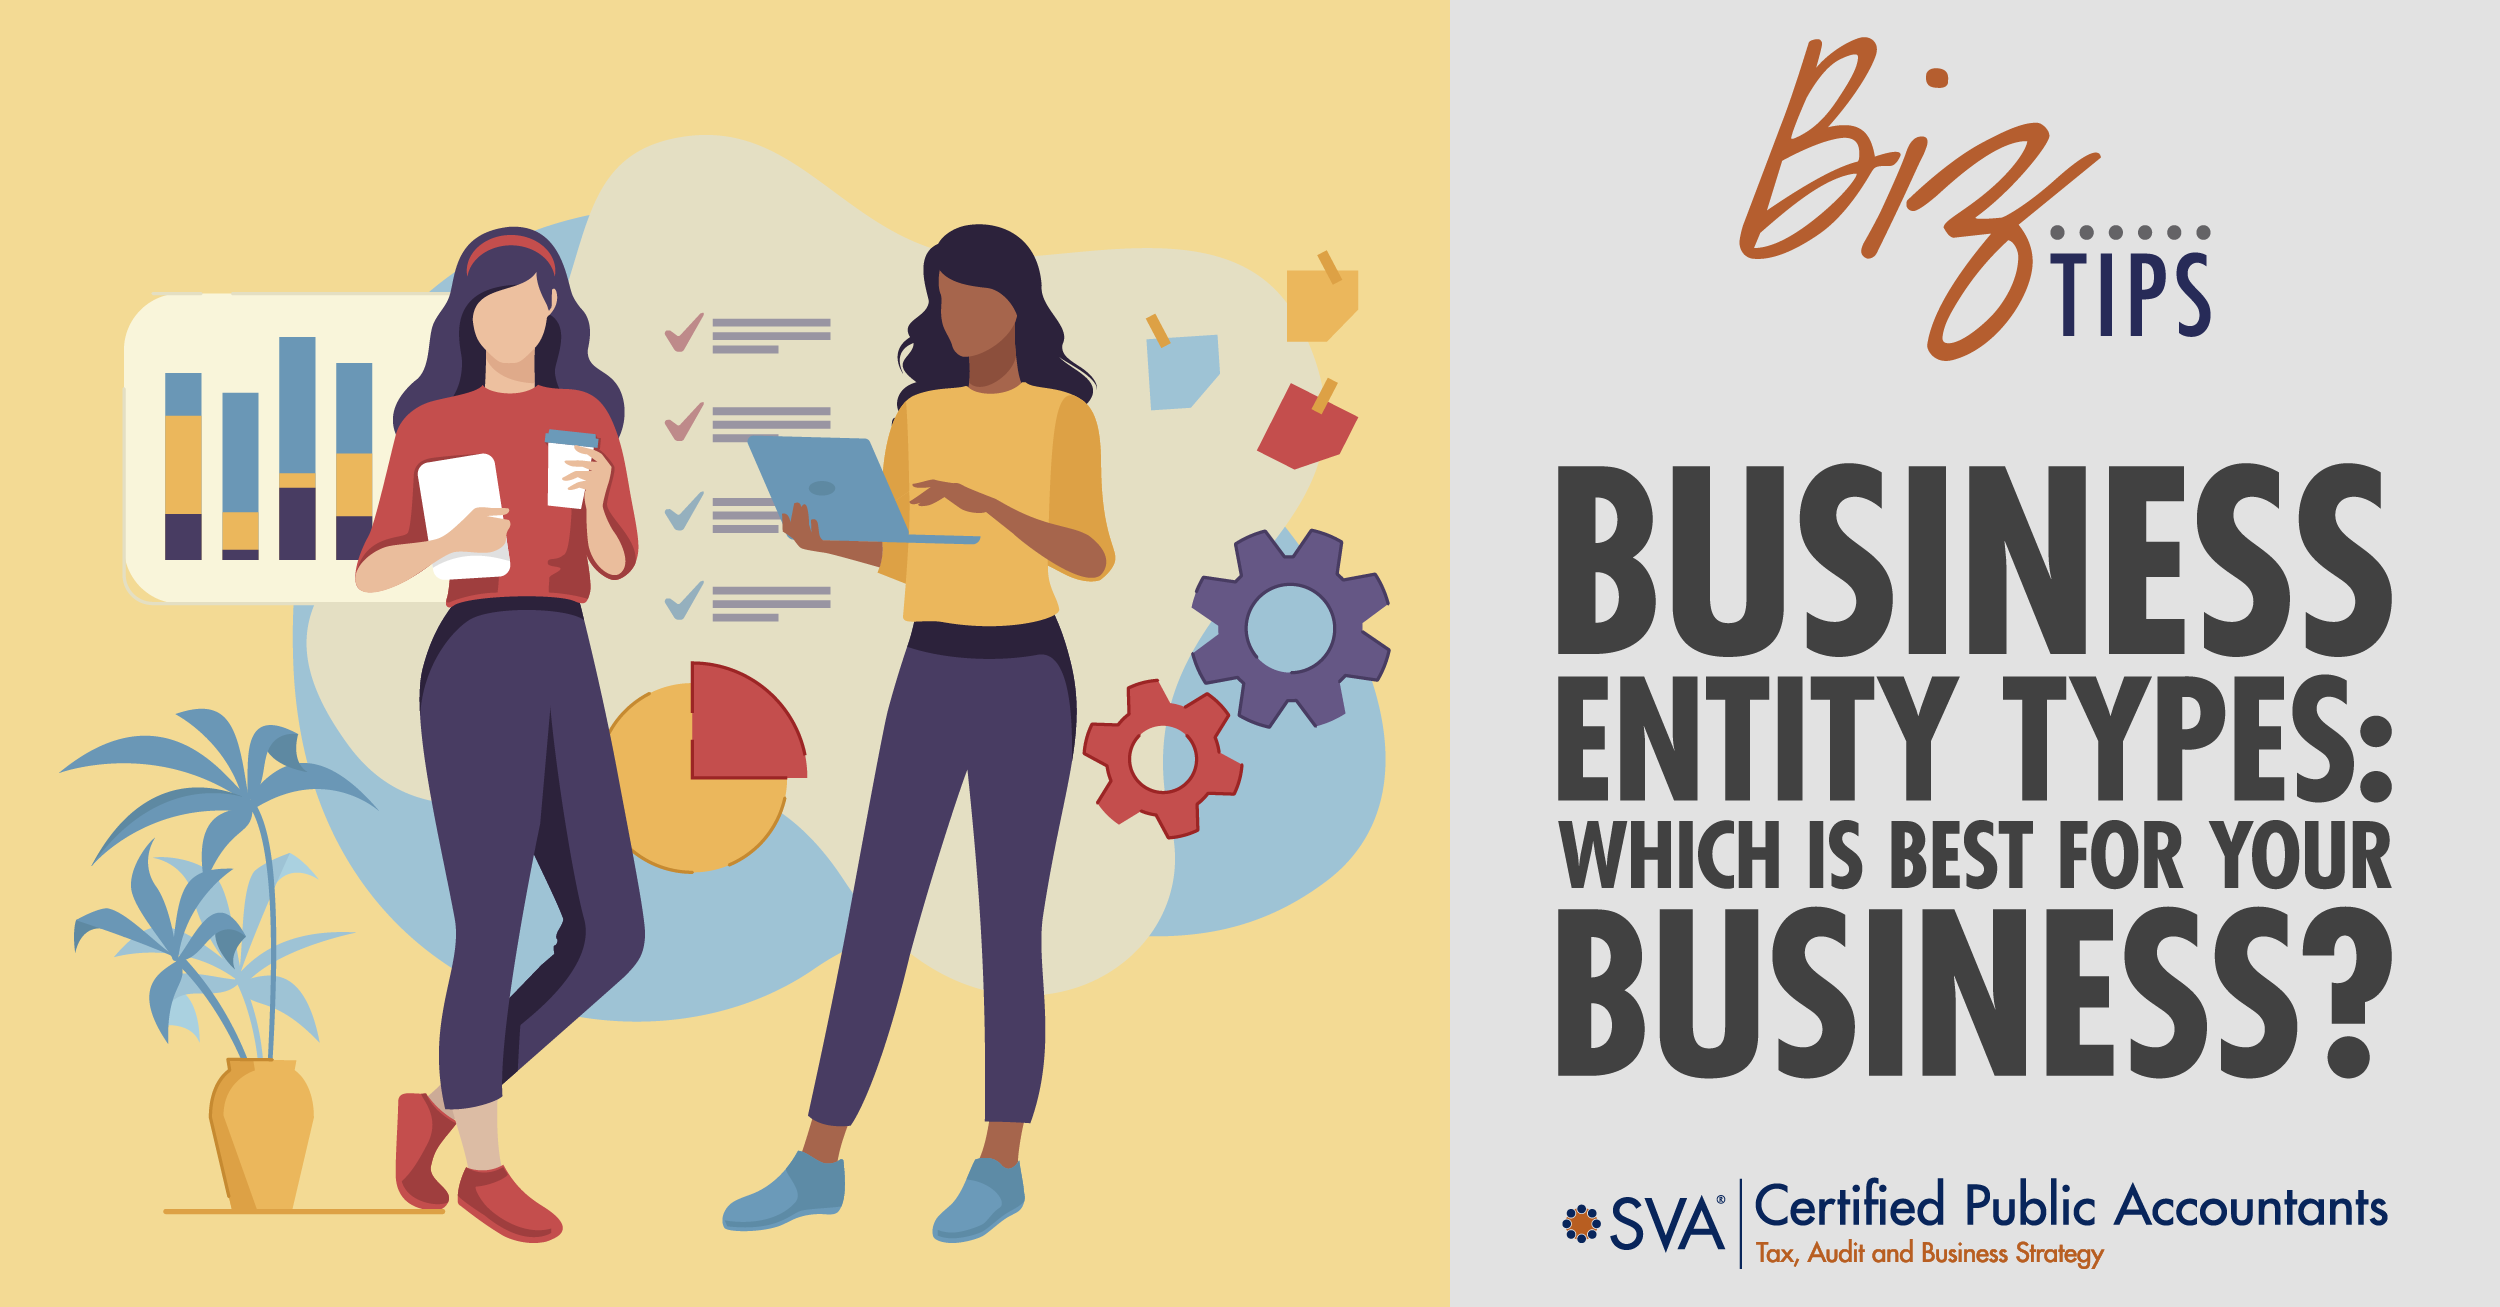 Business Entity Types - Which is Best for Your Business?